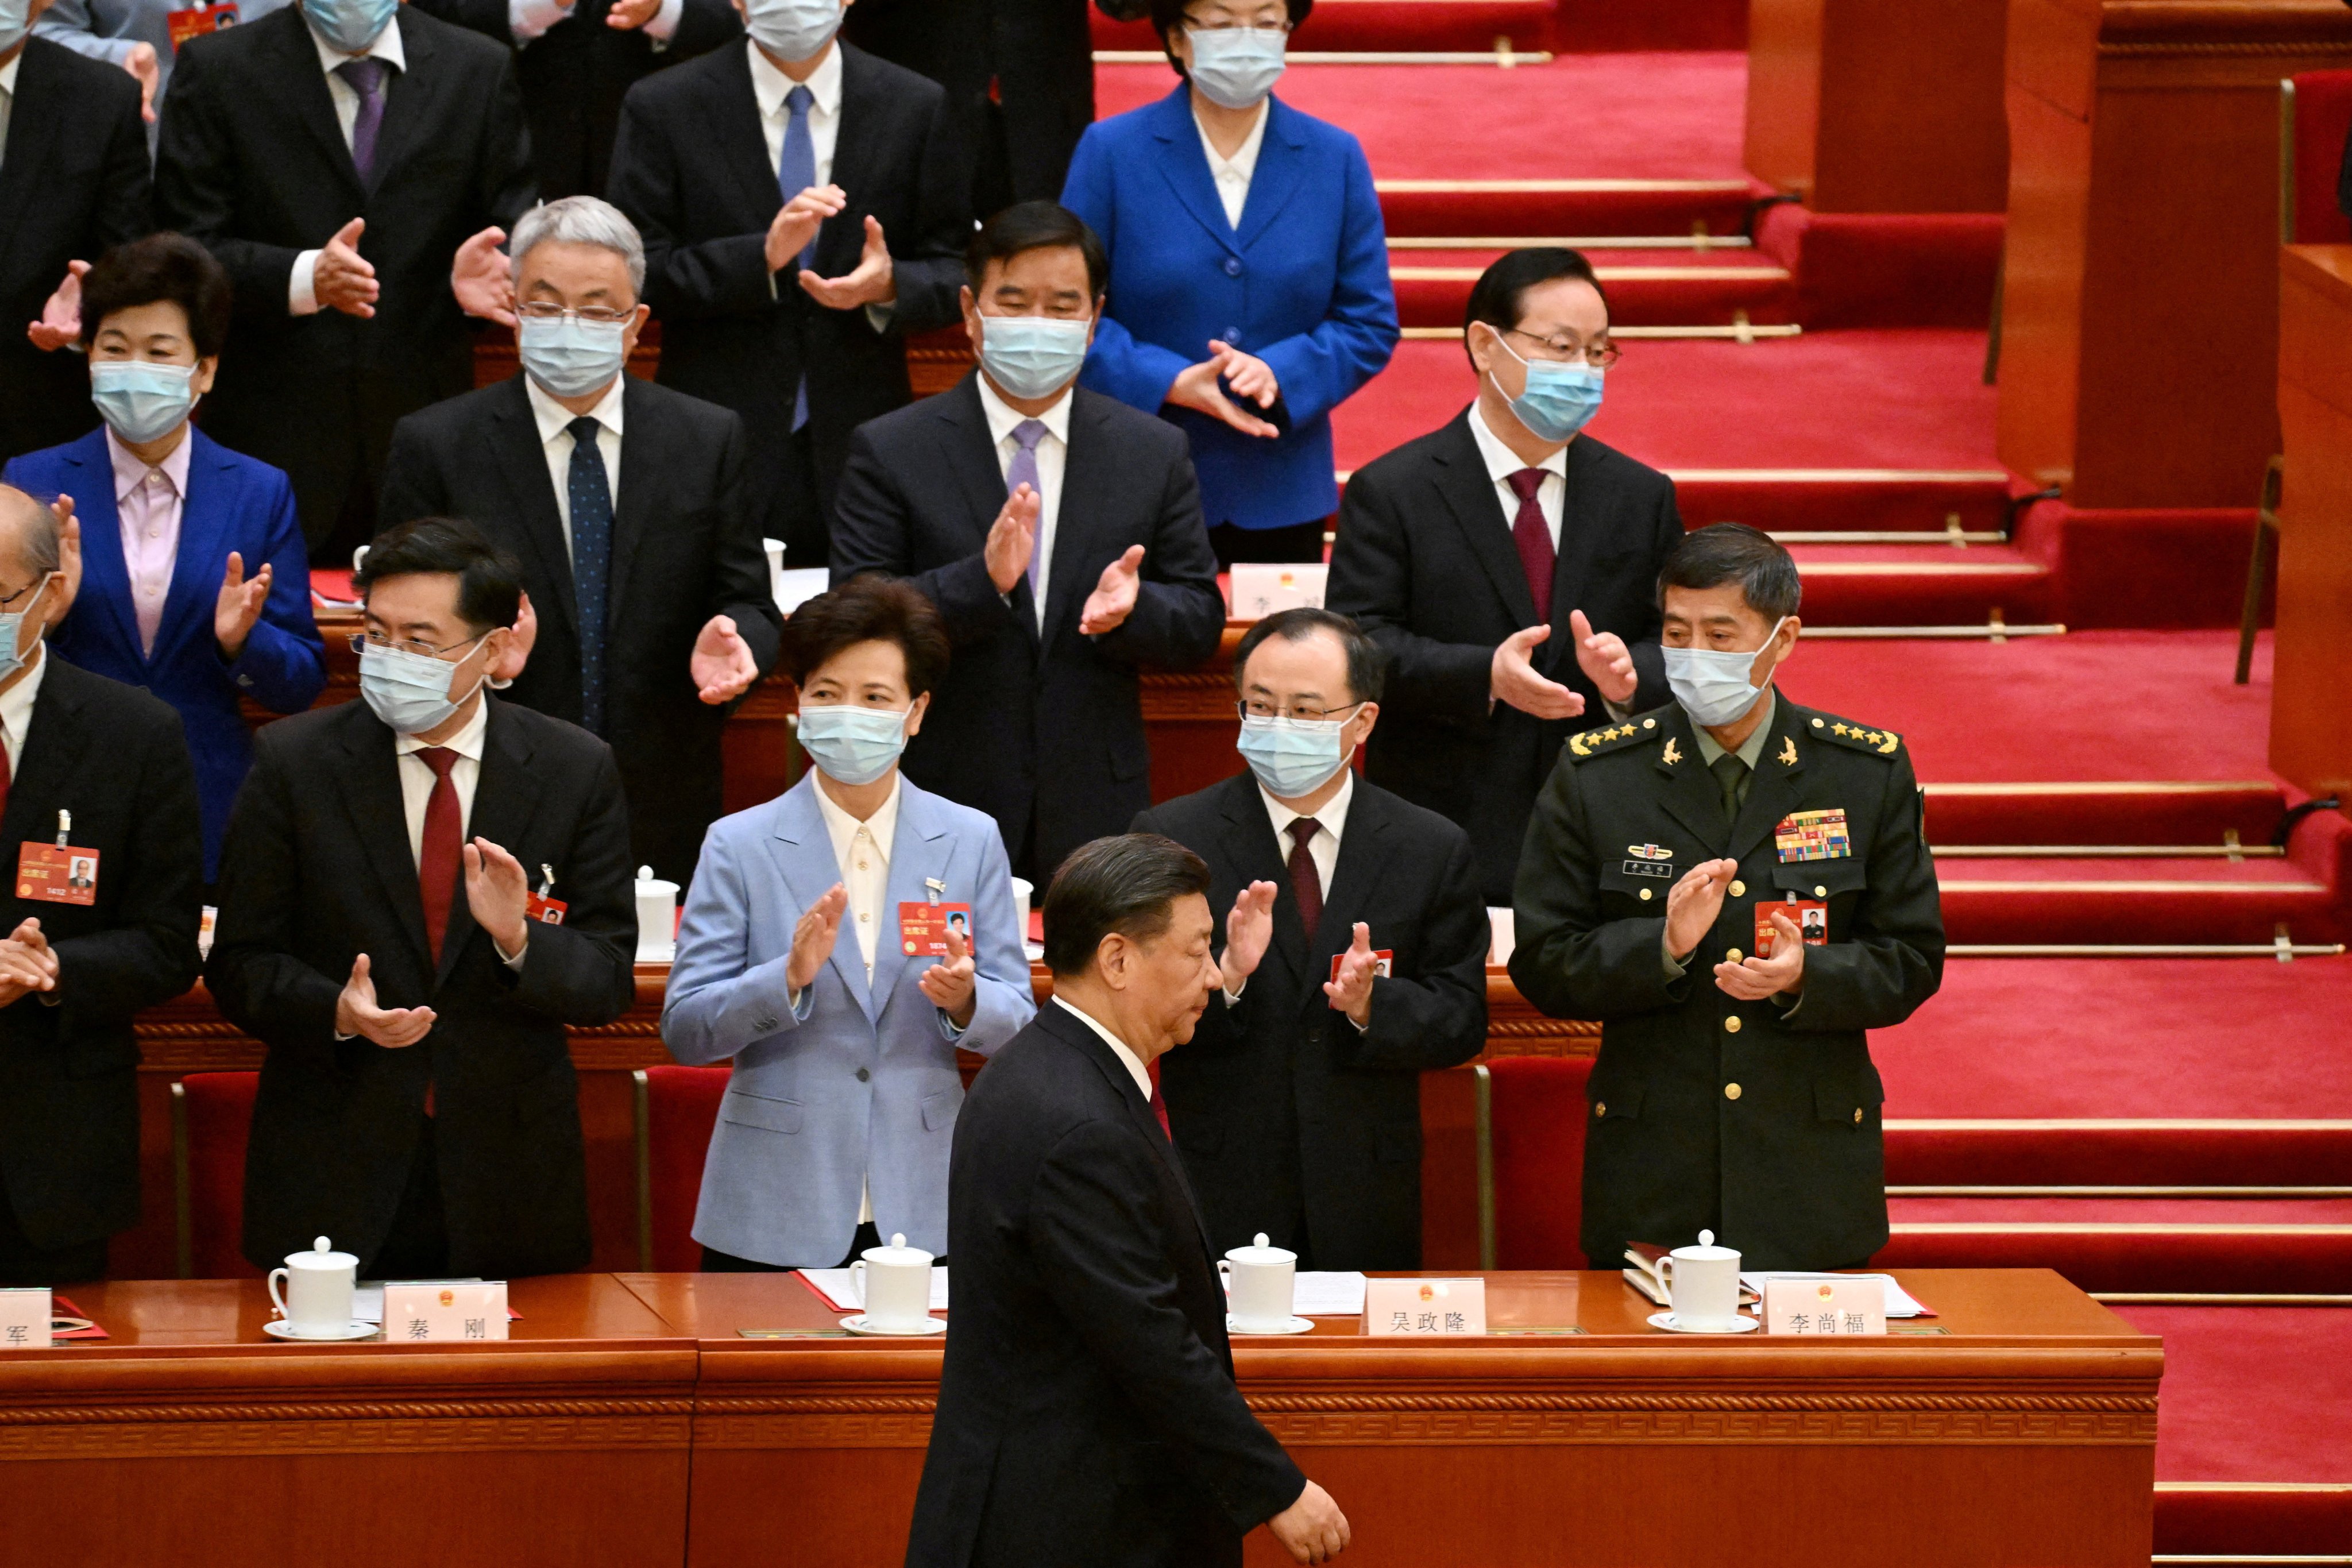 Li Shangfu (right), who was stripped of his role as defence minister and his membership in the Central Military Commission, was the fourth highest ranking member in the seven-seat body, behind President Xi Jinping and the commission’s deputy chairman, Zhang Youxia. Photo: Pool via Reuters 